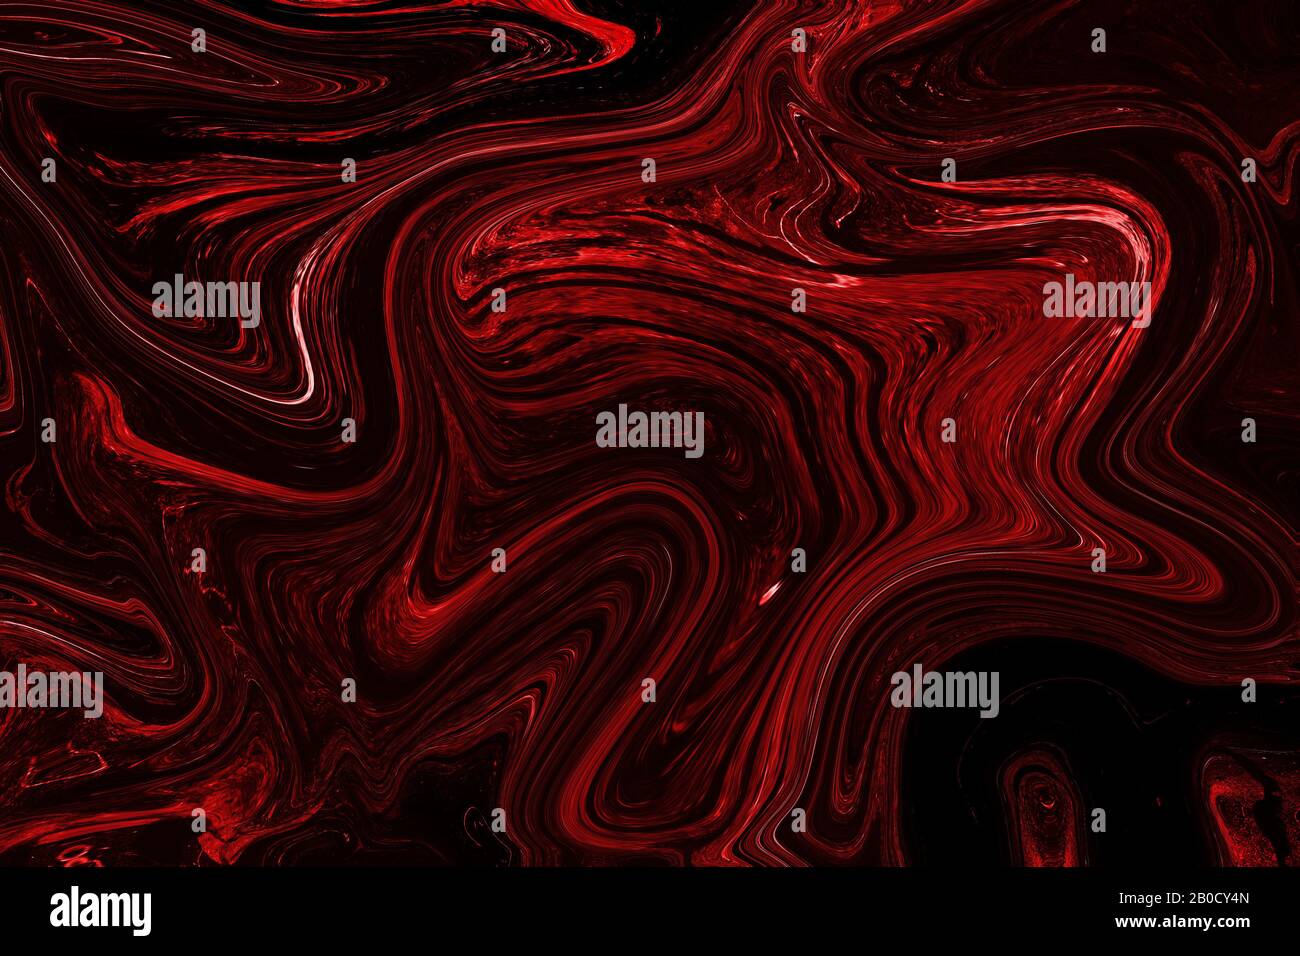 red and black liquid color. abstract background and texture. illustration design. Stock Photo